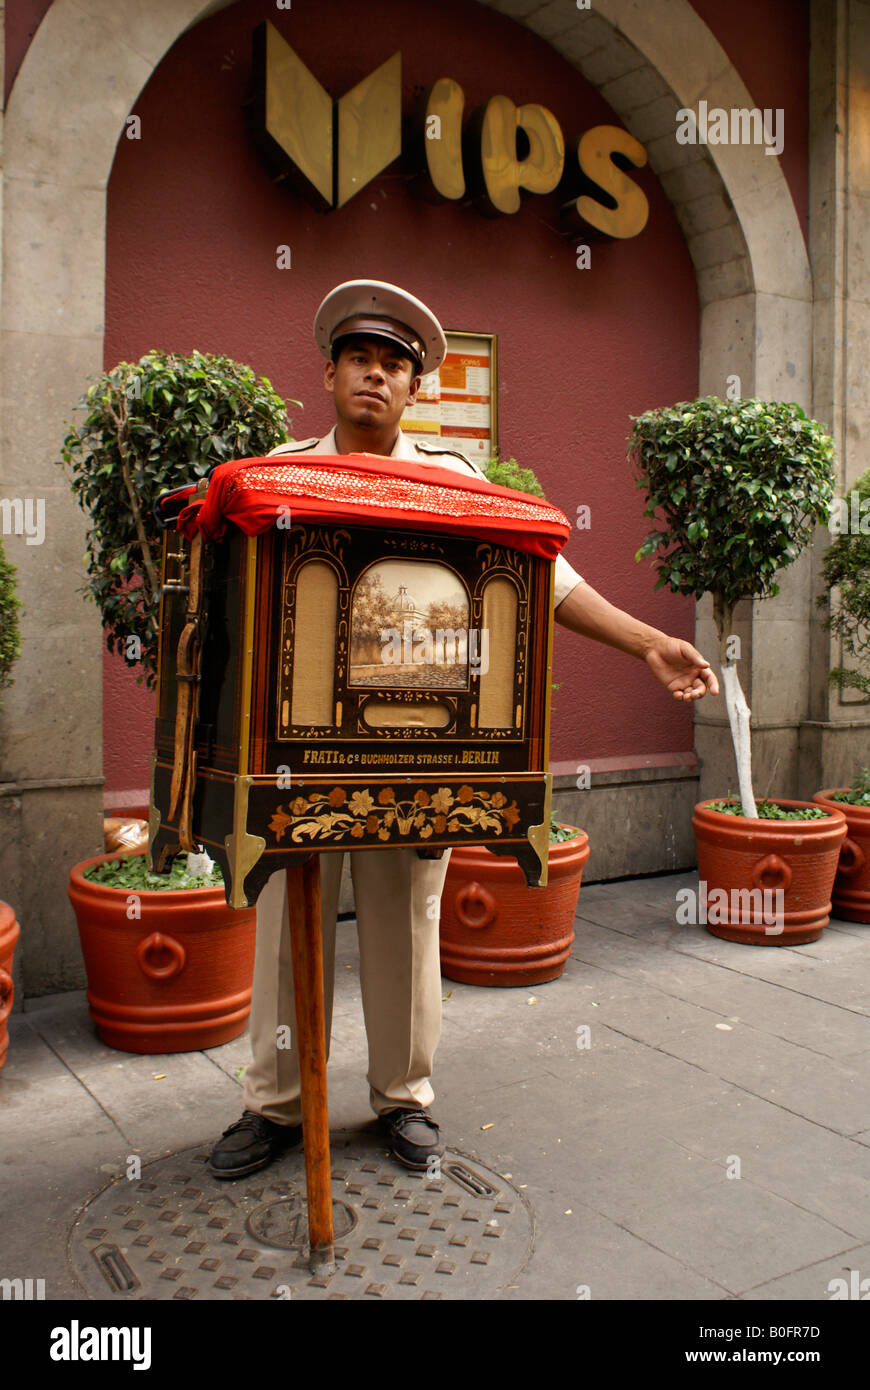 Mexico City organ-grinder outside VIPS Restaurant in the Centro Historico Stock Photo